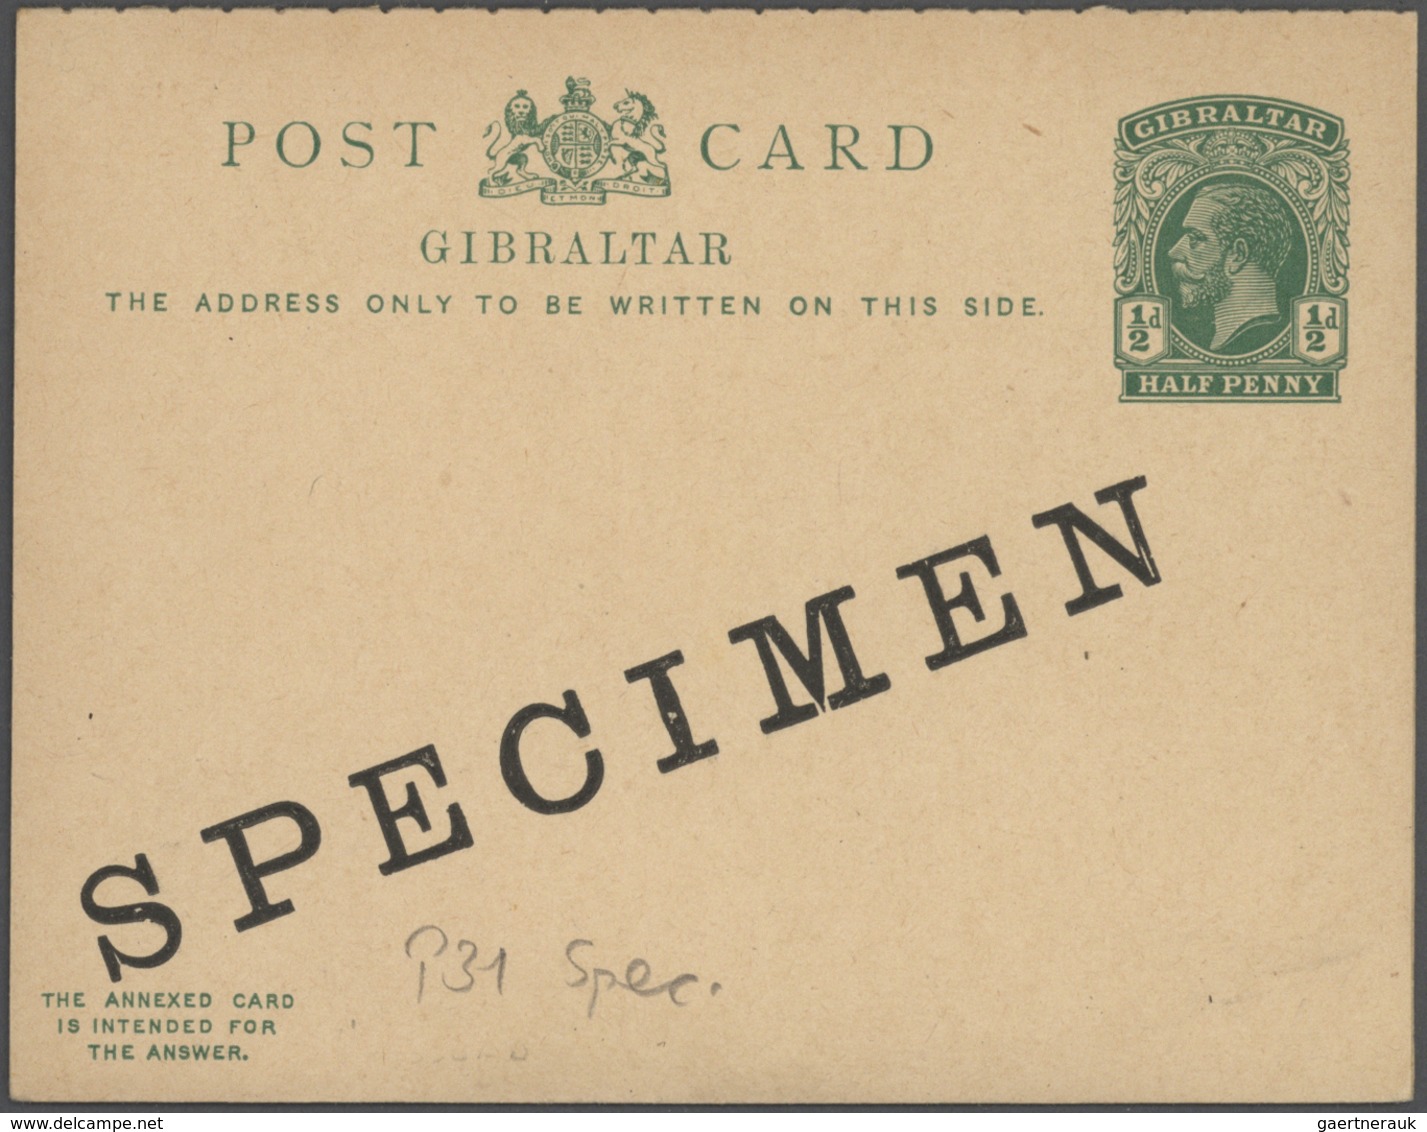 26566 Gibraltar - Ganzsachen: 1887/1940, interesting lot of ca. 64 postal stationery cards and covers, the